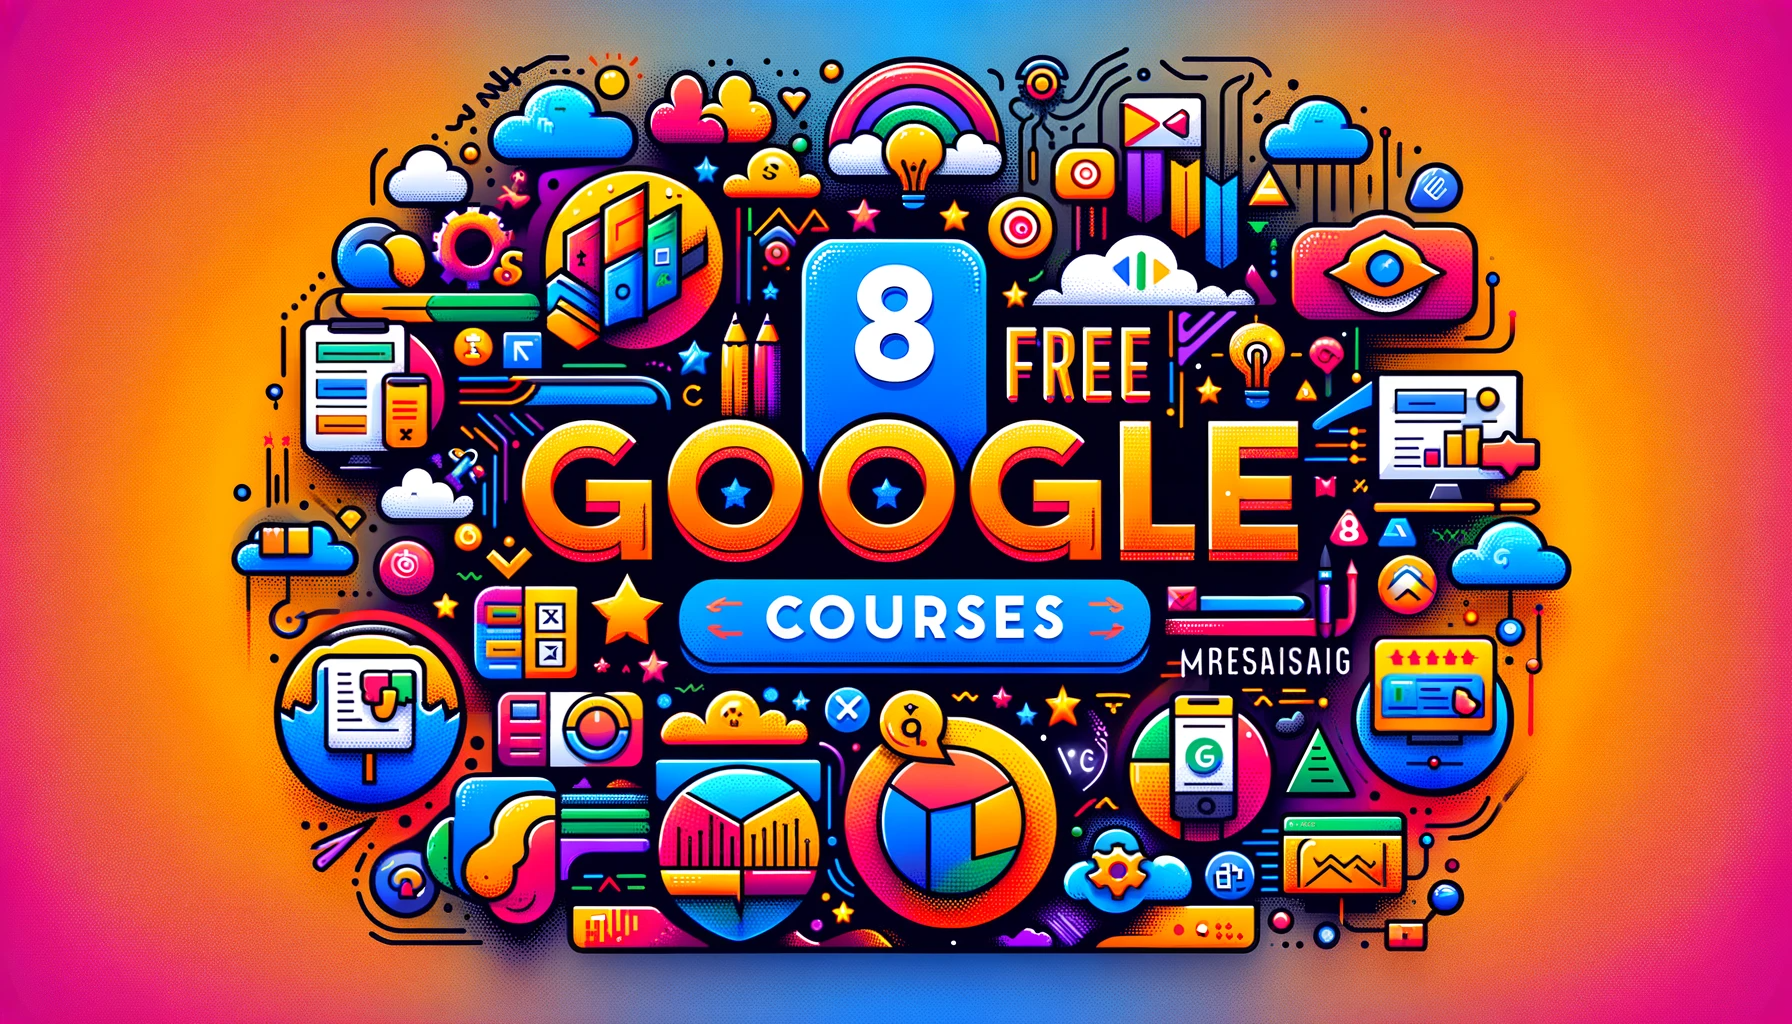 8 Free Google Courses to Land Top Paying Jobs